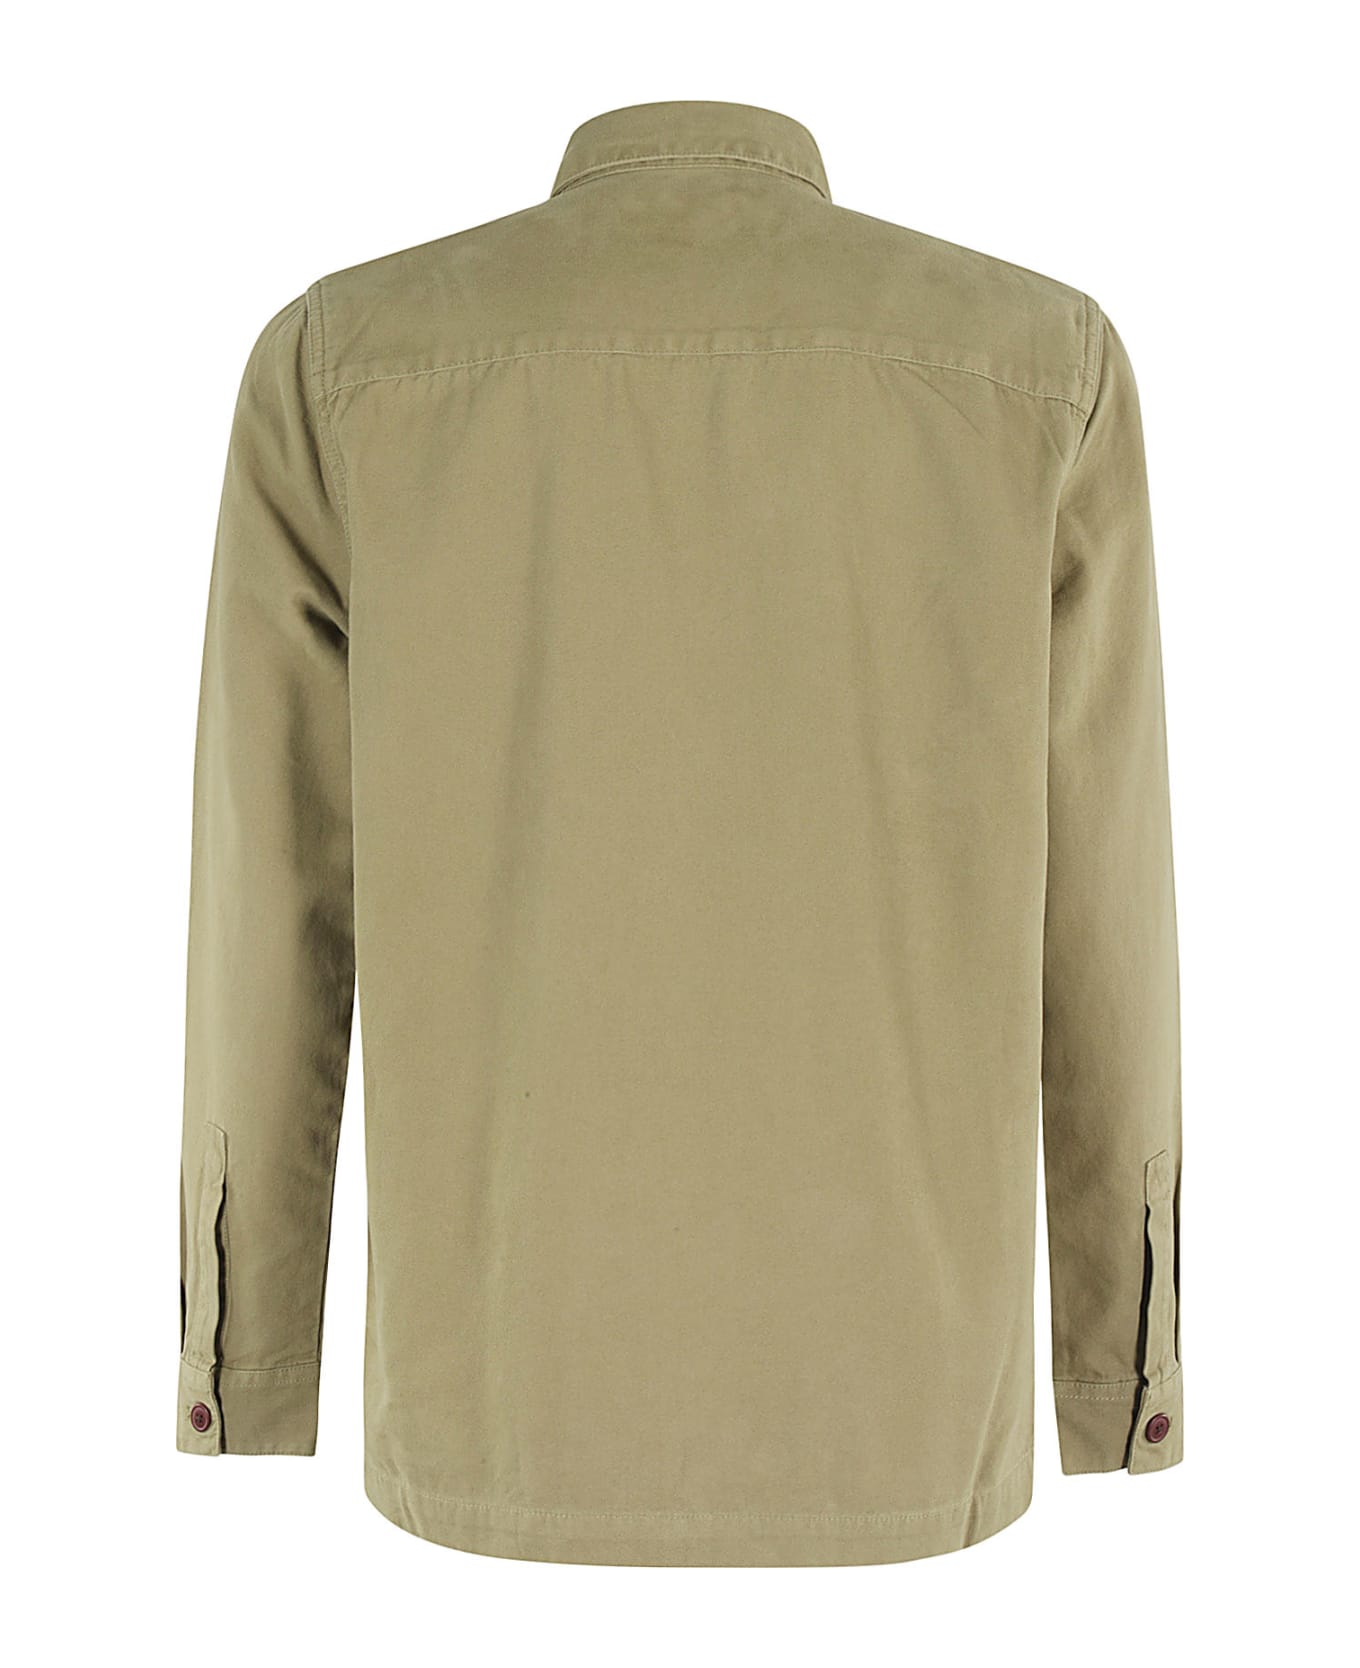 Barbour Washed Overshirt - Bleached Olive